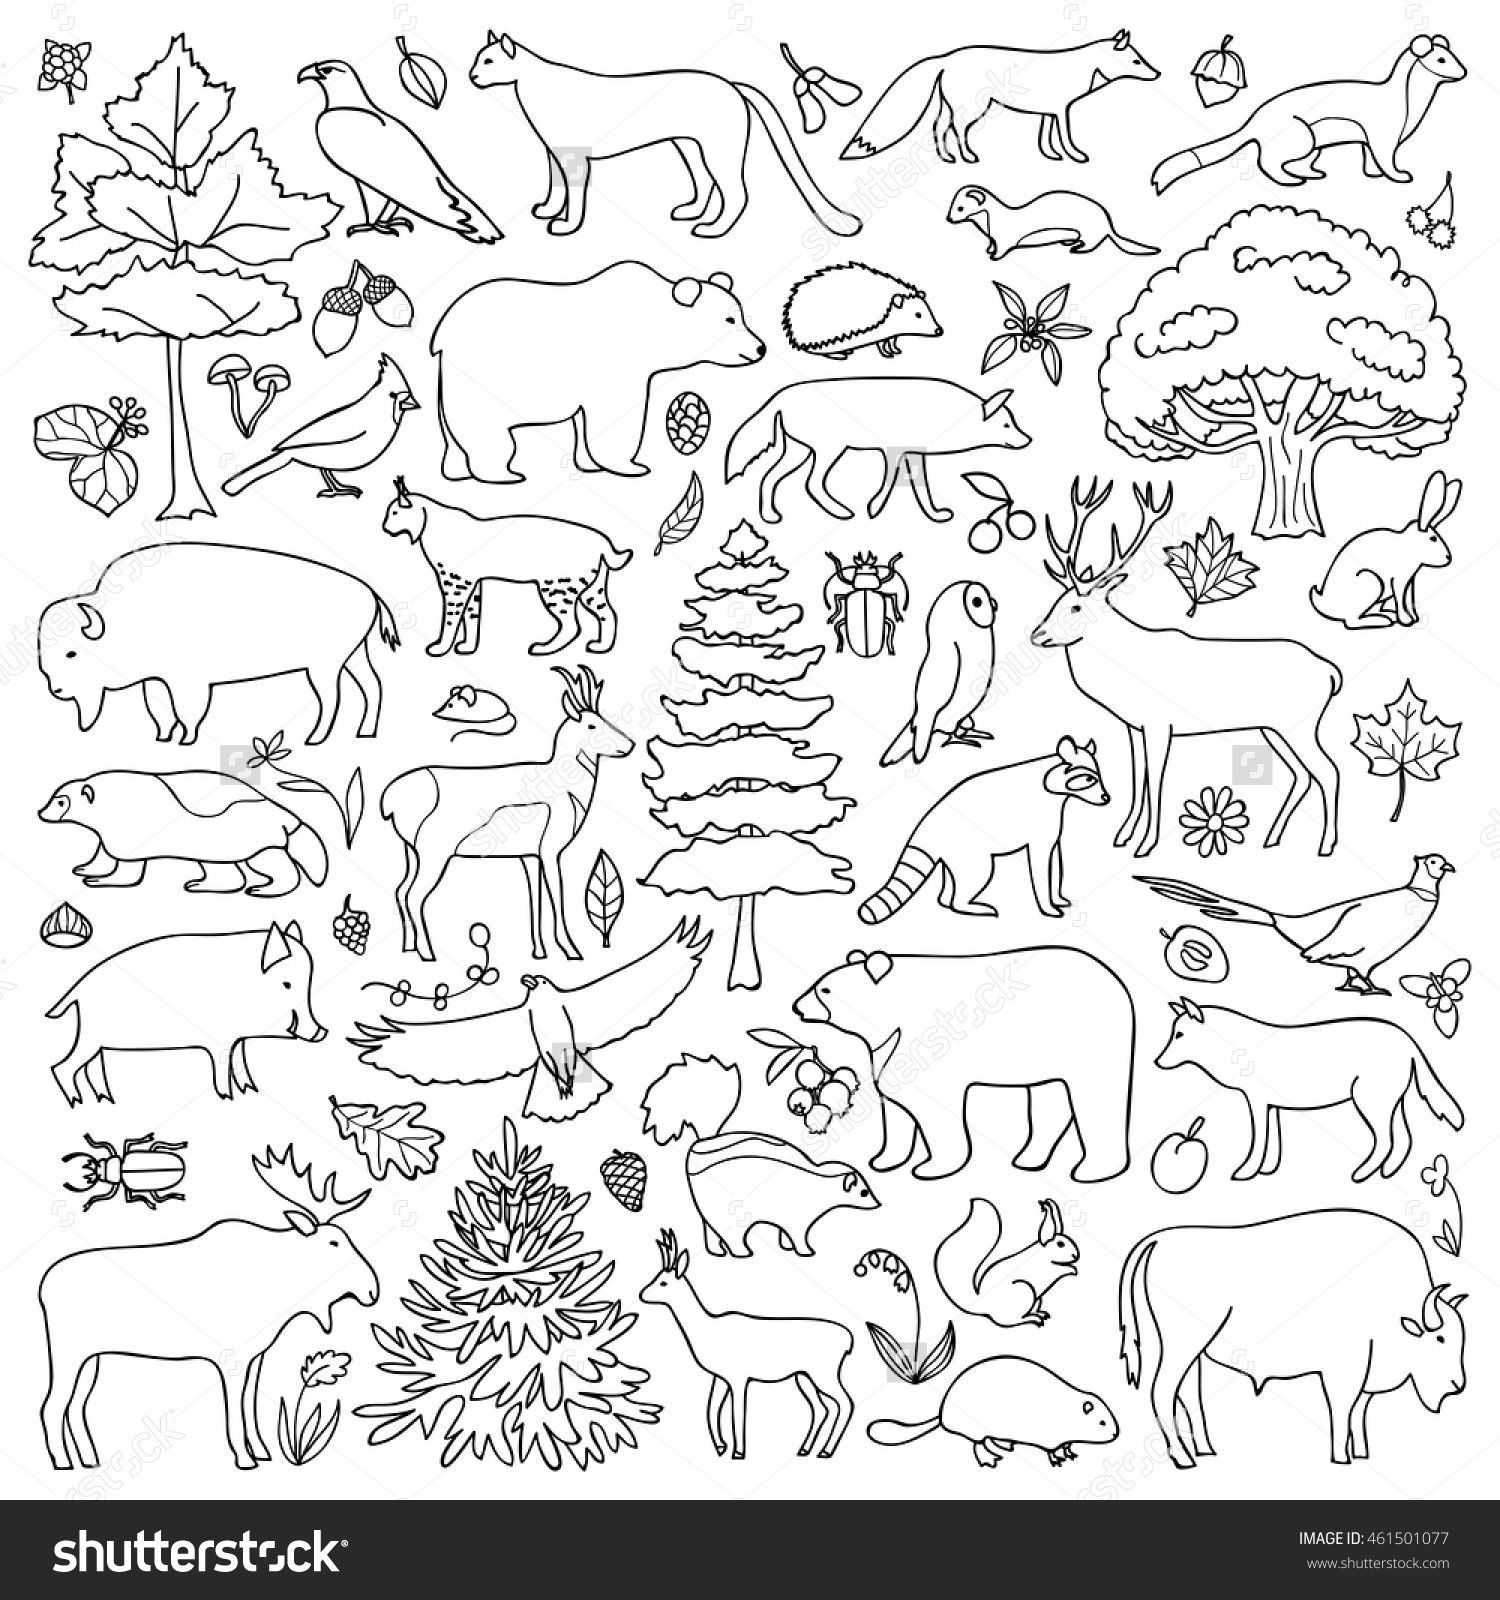 Forest animal coloring pages â through the thousand photographs on the internet about forest animal coâ animal coloring pages coloring pages bird coloring pages